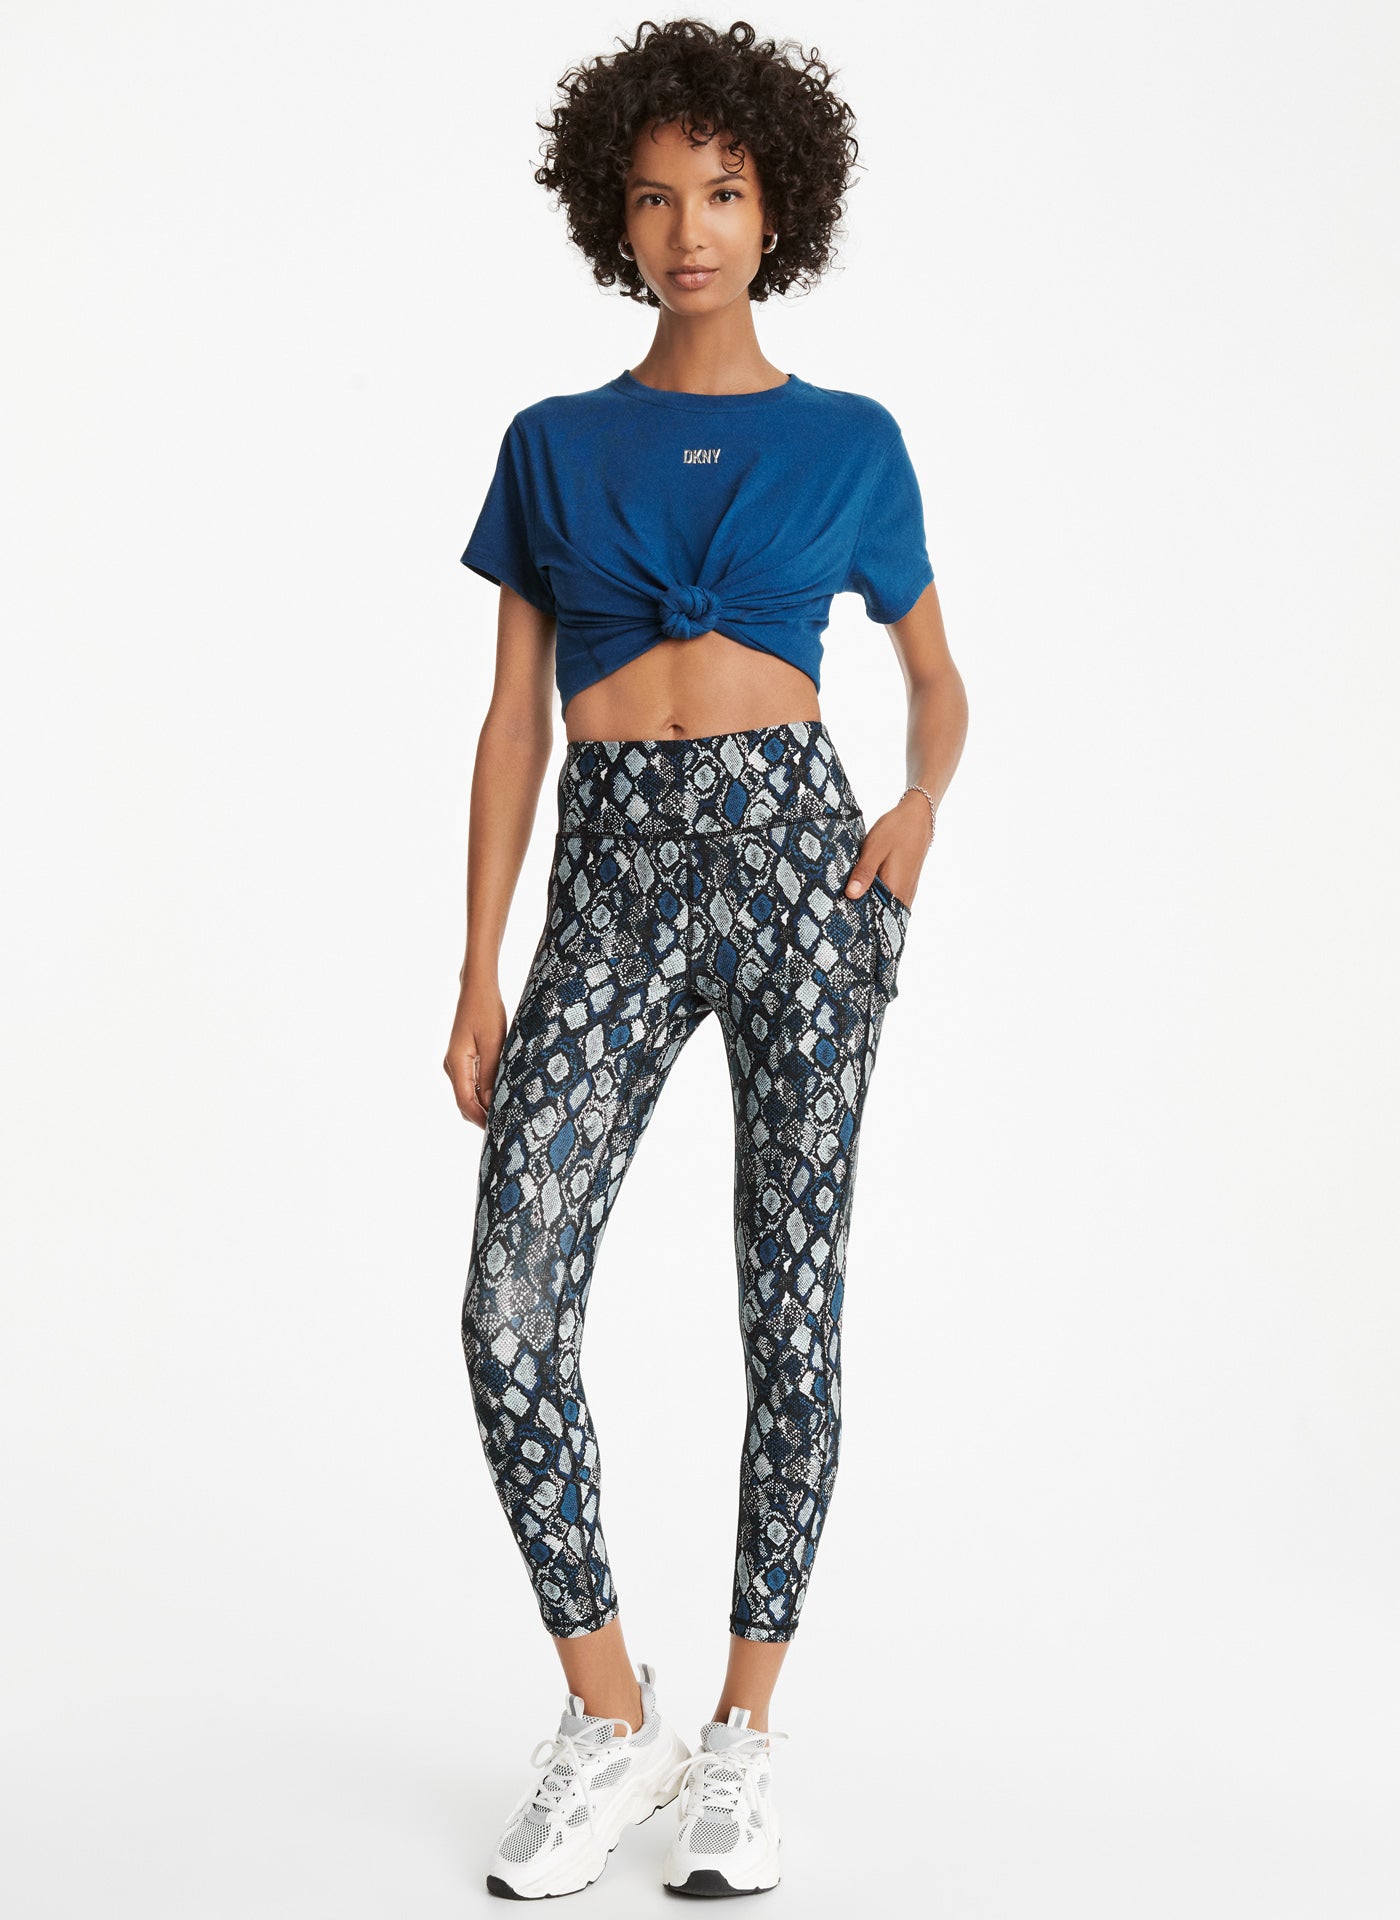 Dkny Leggings For Women  International Society of Precision Agriculture